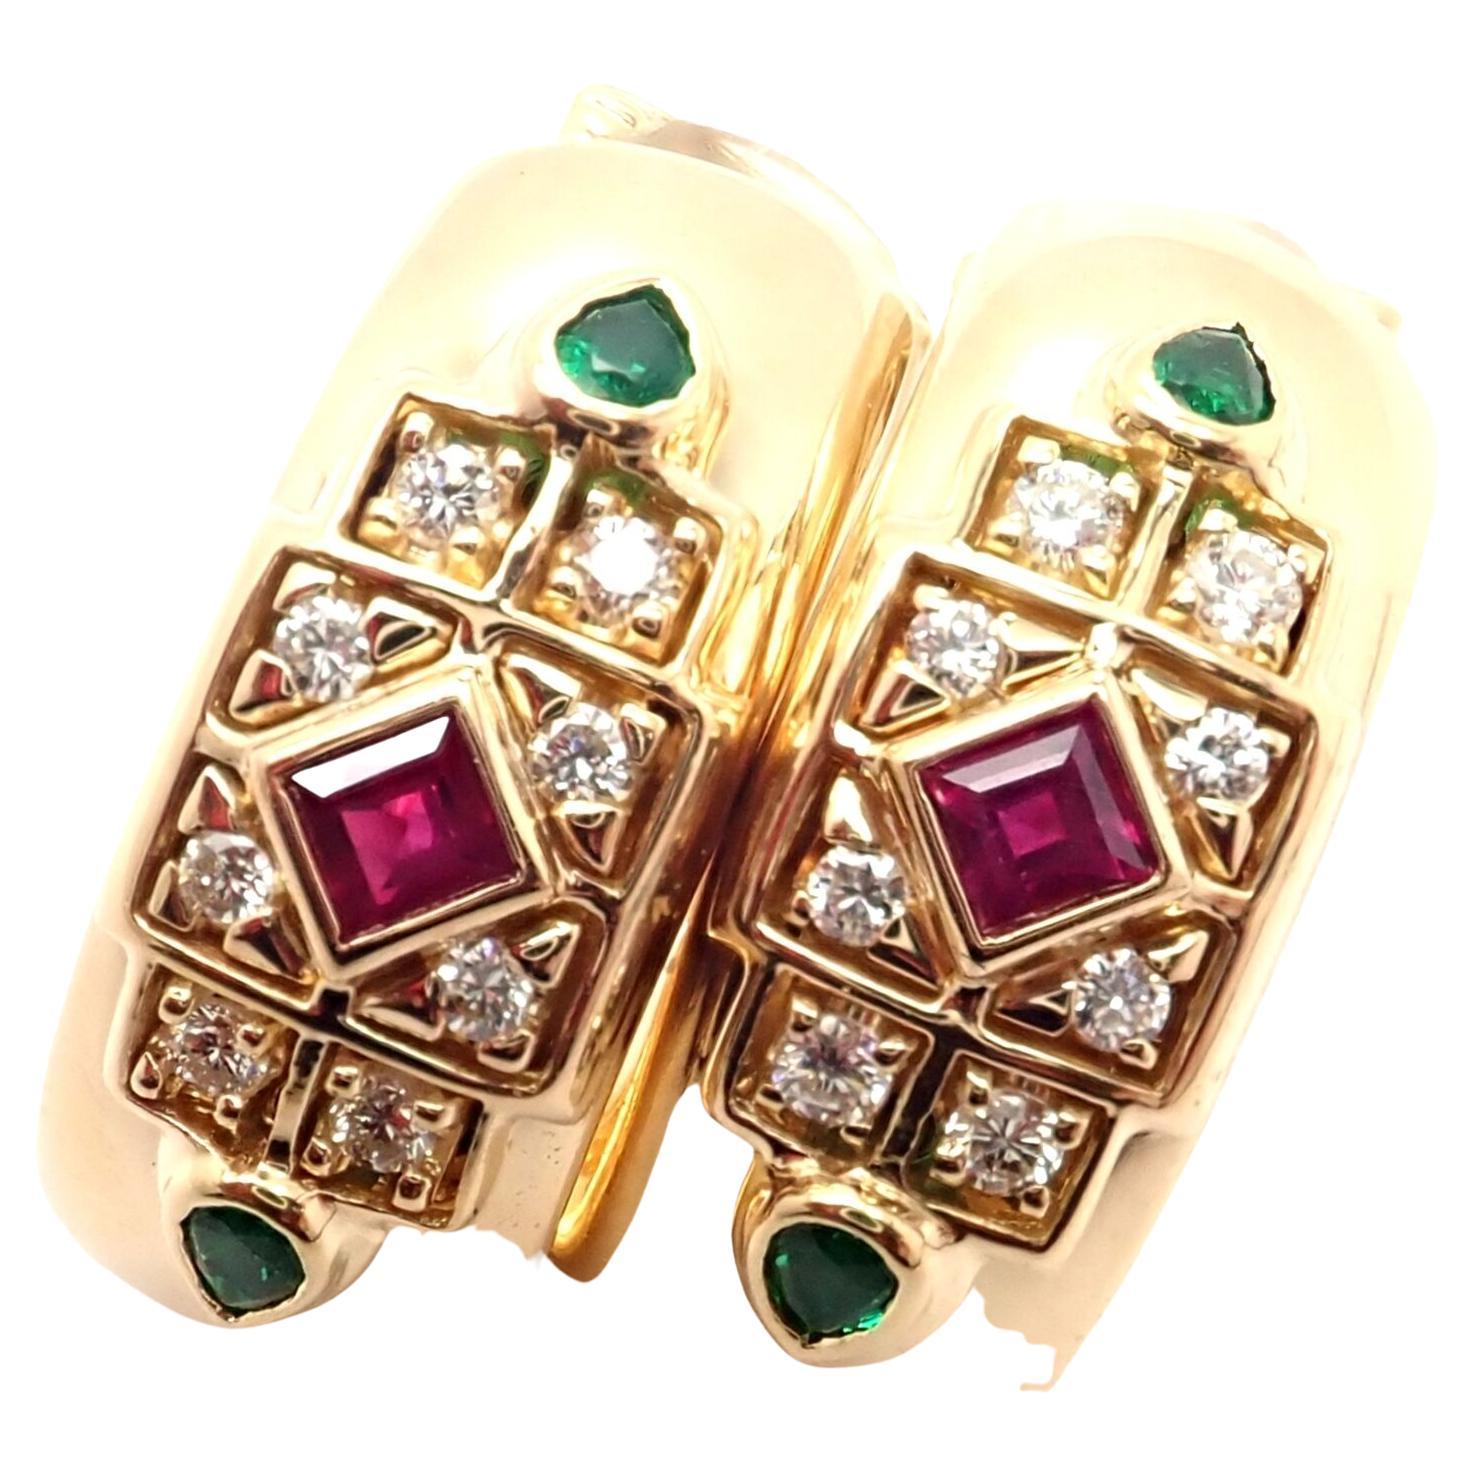 18k Yellow Gold Byzantine Diamond, Ruby, and Emerald Hoop Earrings by Cartier. 
With 16 Round brilliant cut diamonds VVS1 clarity, F-H color, 2 Rubies and 4 Emeralds
These earrings are made for non pierced ears, but they can be converted to pierced